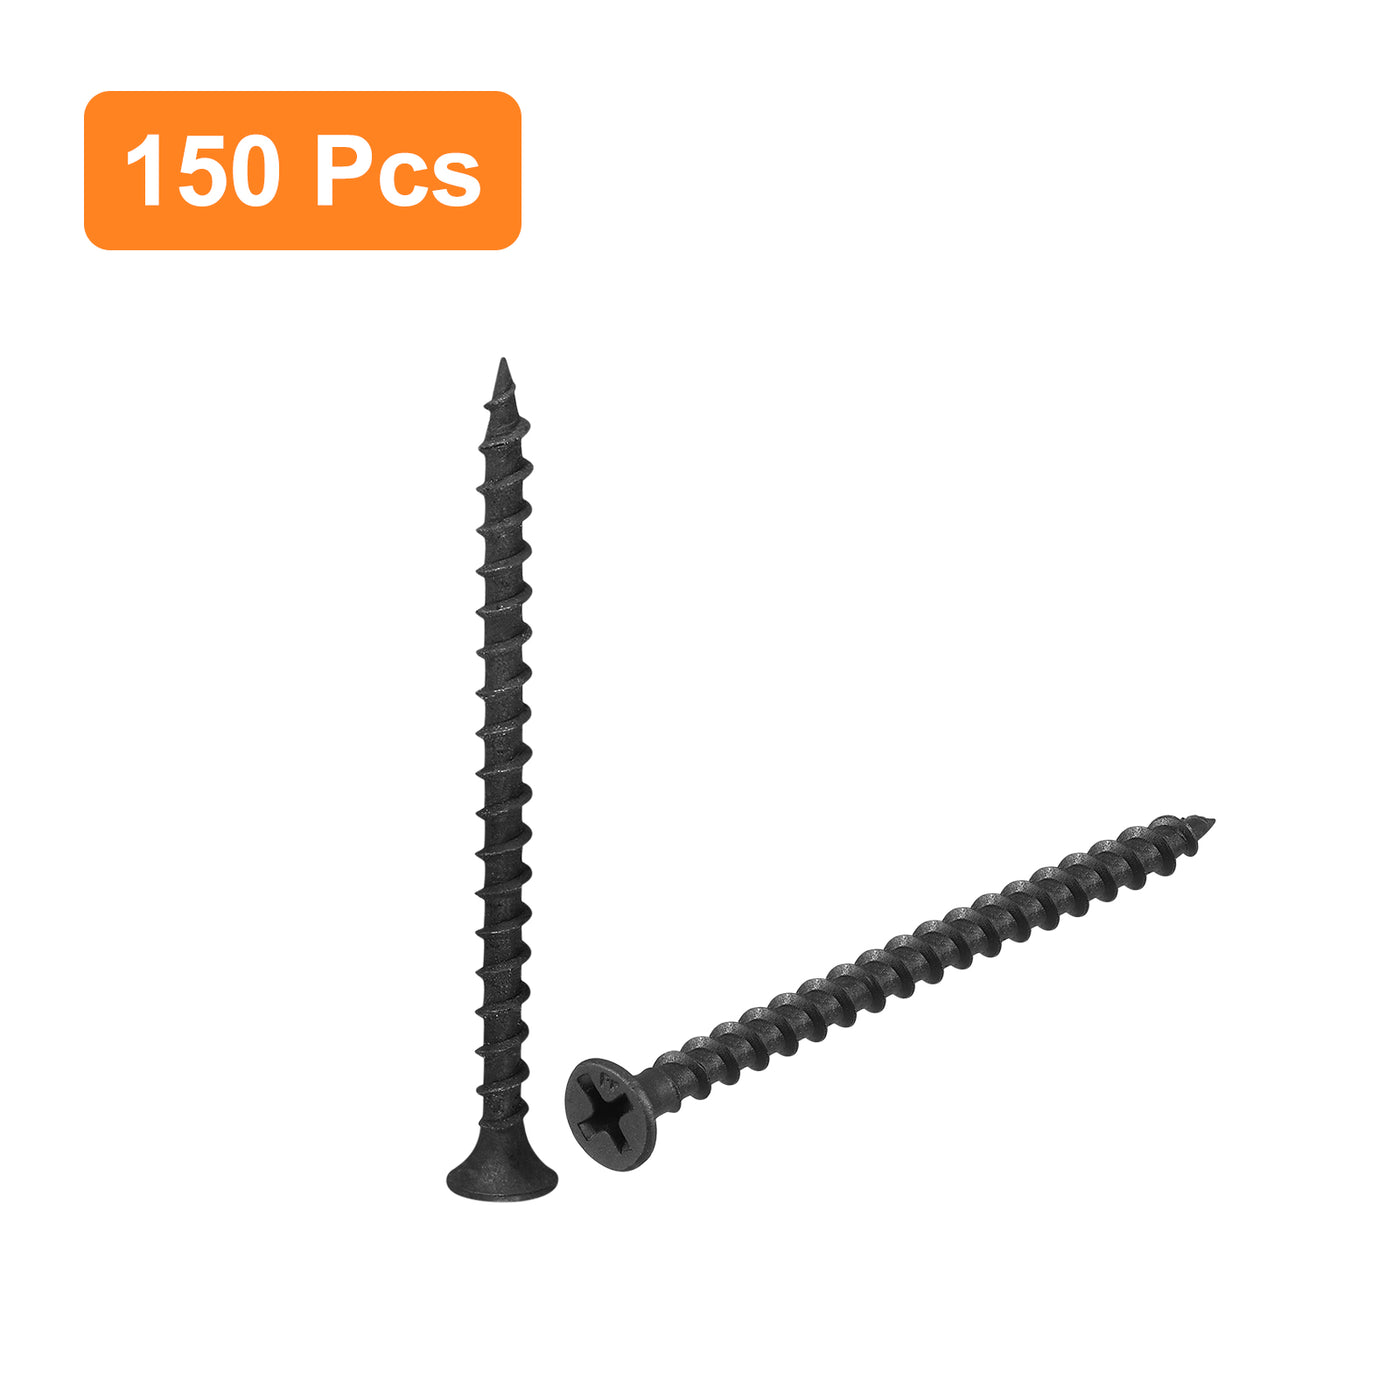 uxcell Uxcell M3.8x60mm 150pcs Phillips Drive Wood Screws, Carbon Steel Self Tapping Screws